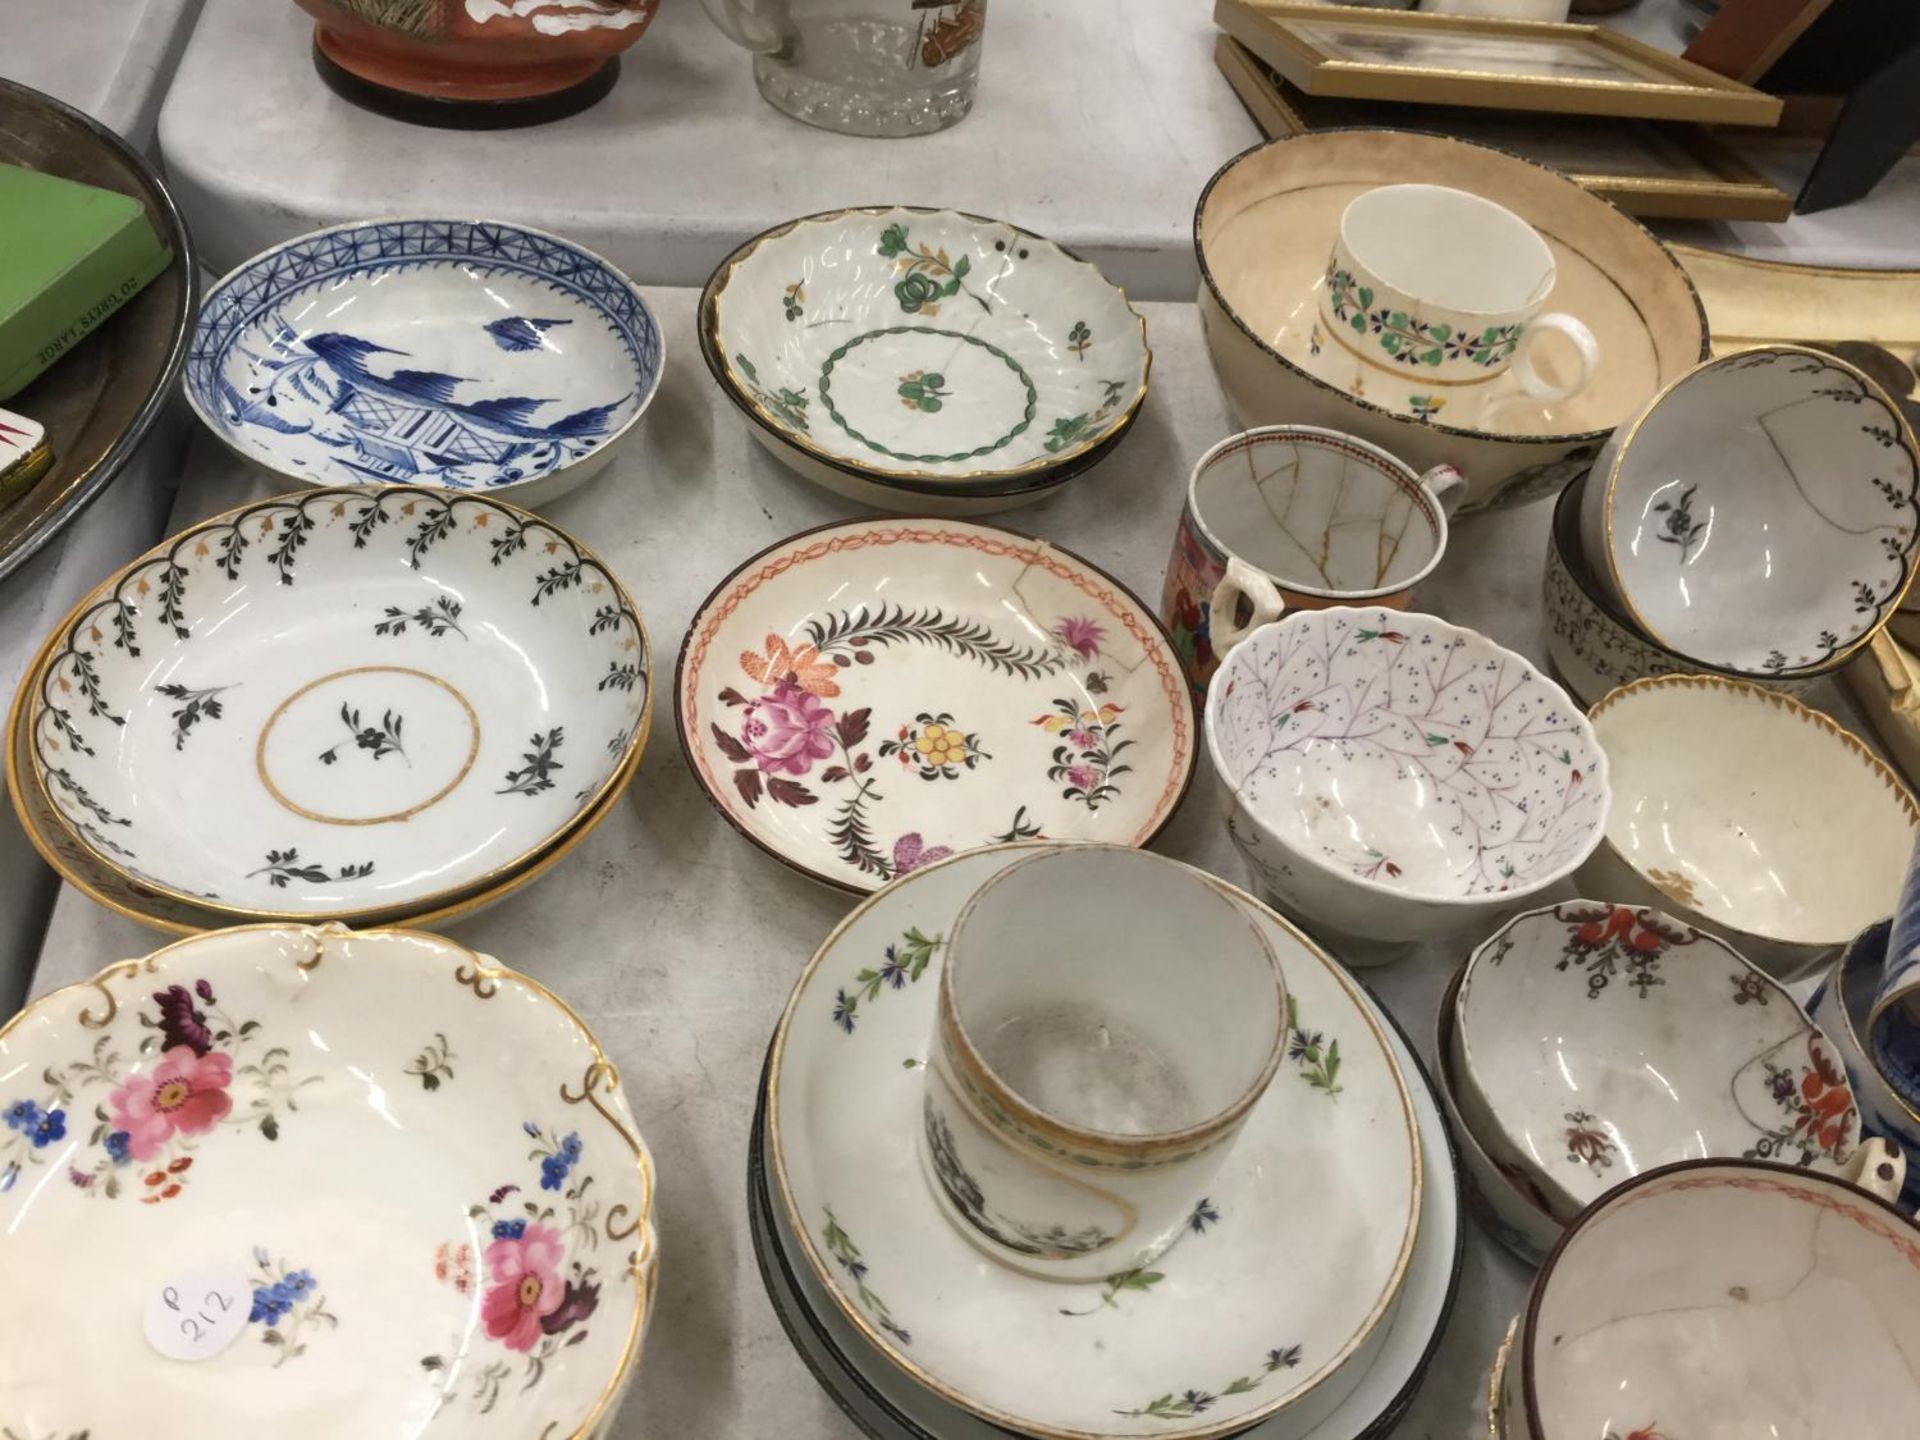 A LARGE QUANTITY OF EARLY 19TH CENTURY TEABOWLS, CUPS AND SAUCERS - SOME A/F - Image 7 of 8